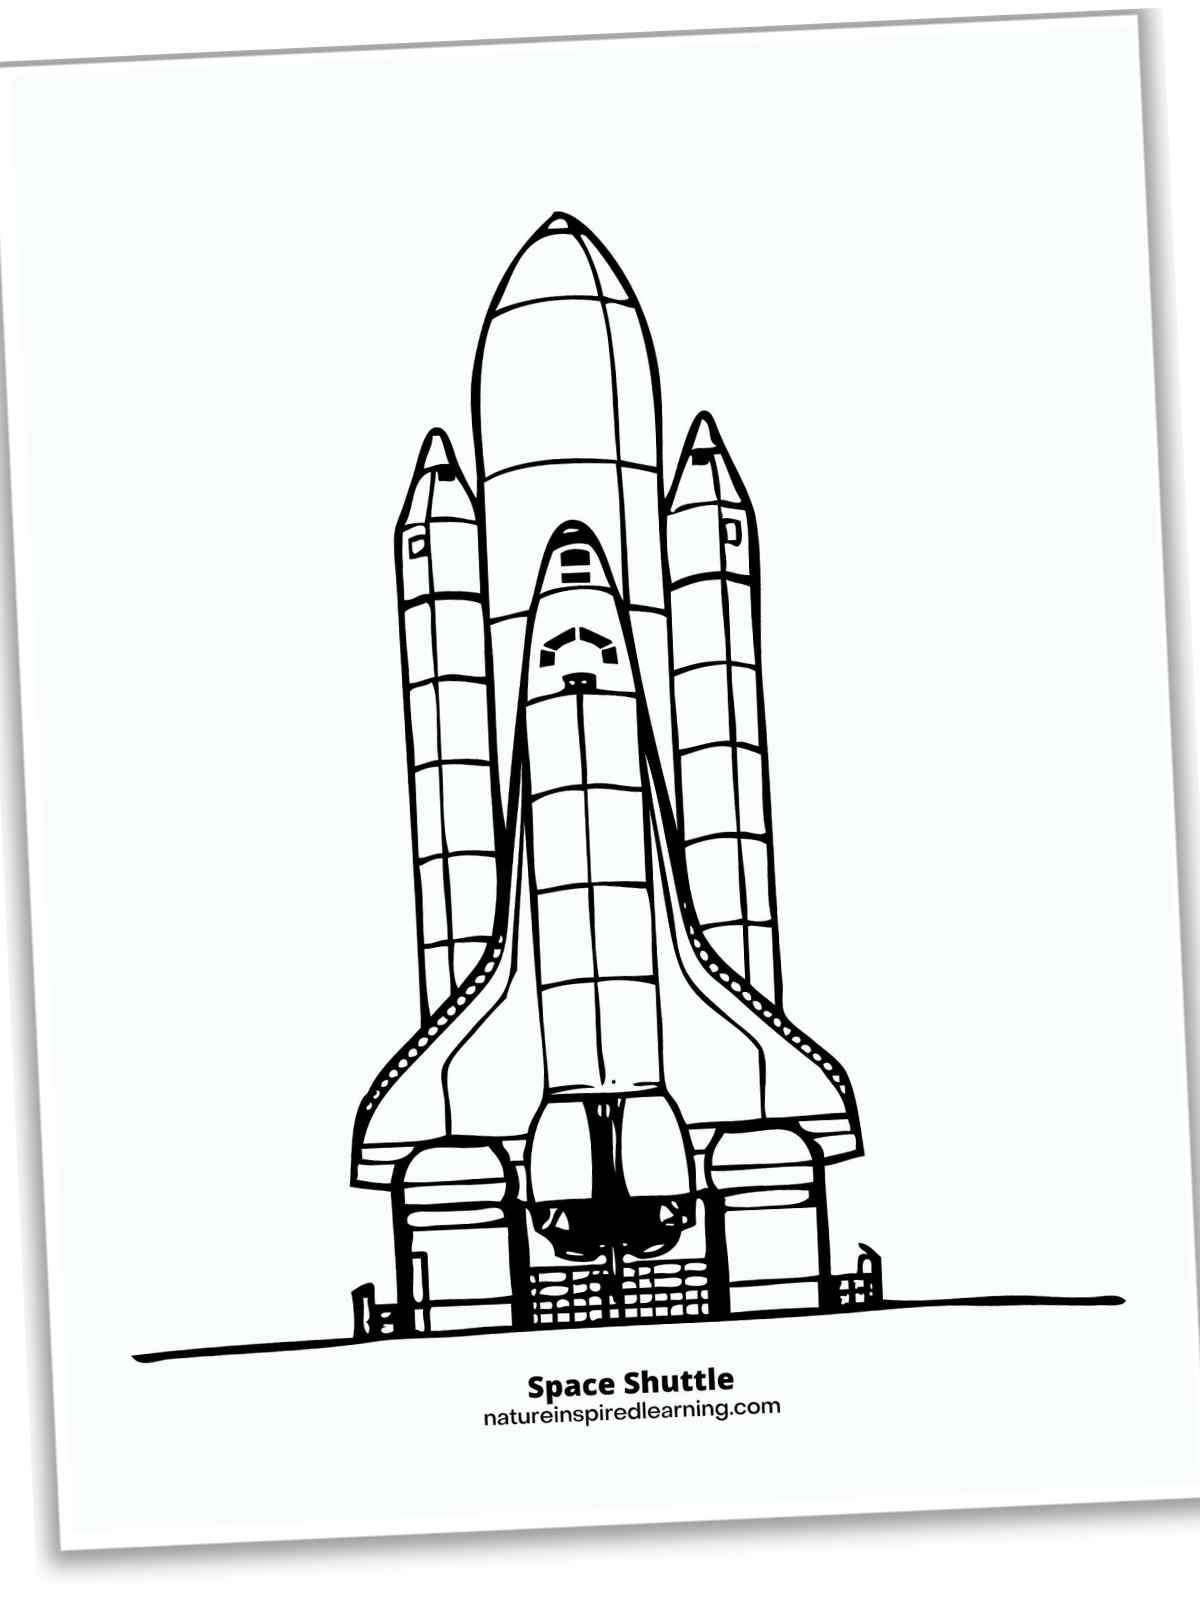 Rocket Ship Coloring Pages - Nature Inspired Learning